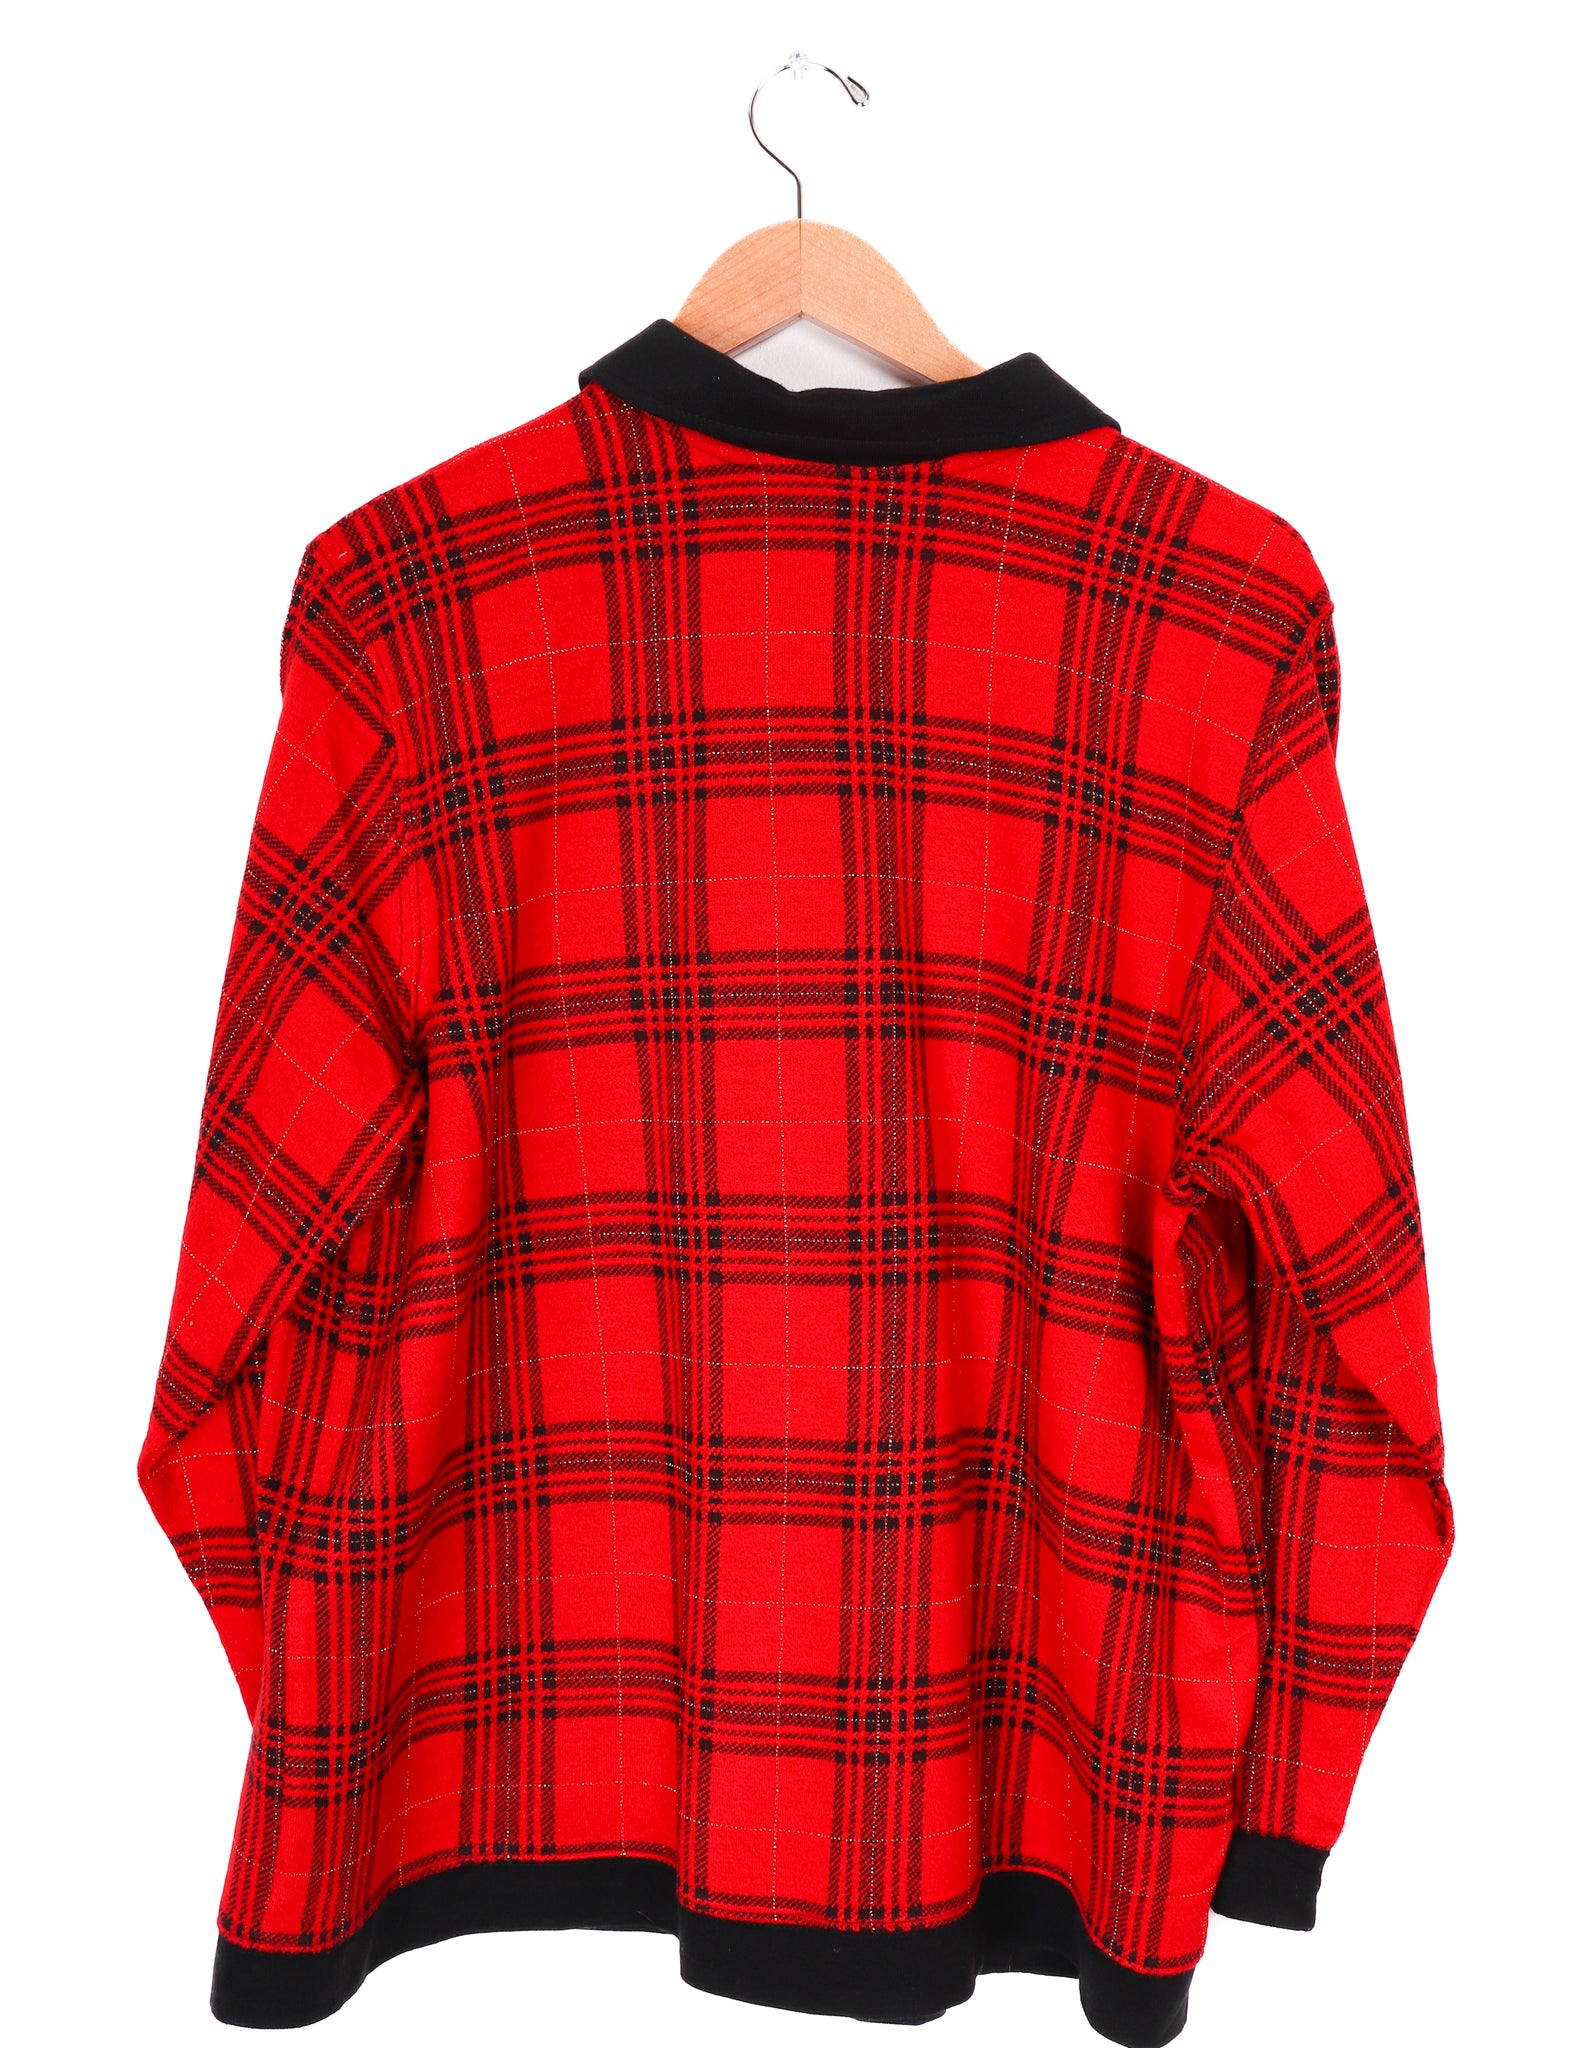 C.D. Daniels Holiday Red Plaid Button Up Sweater Top